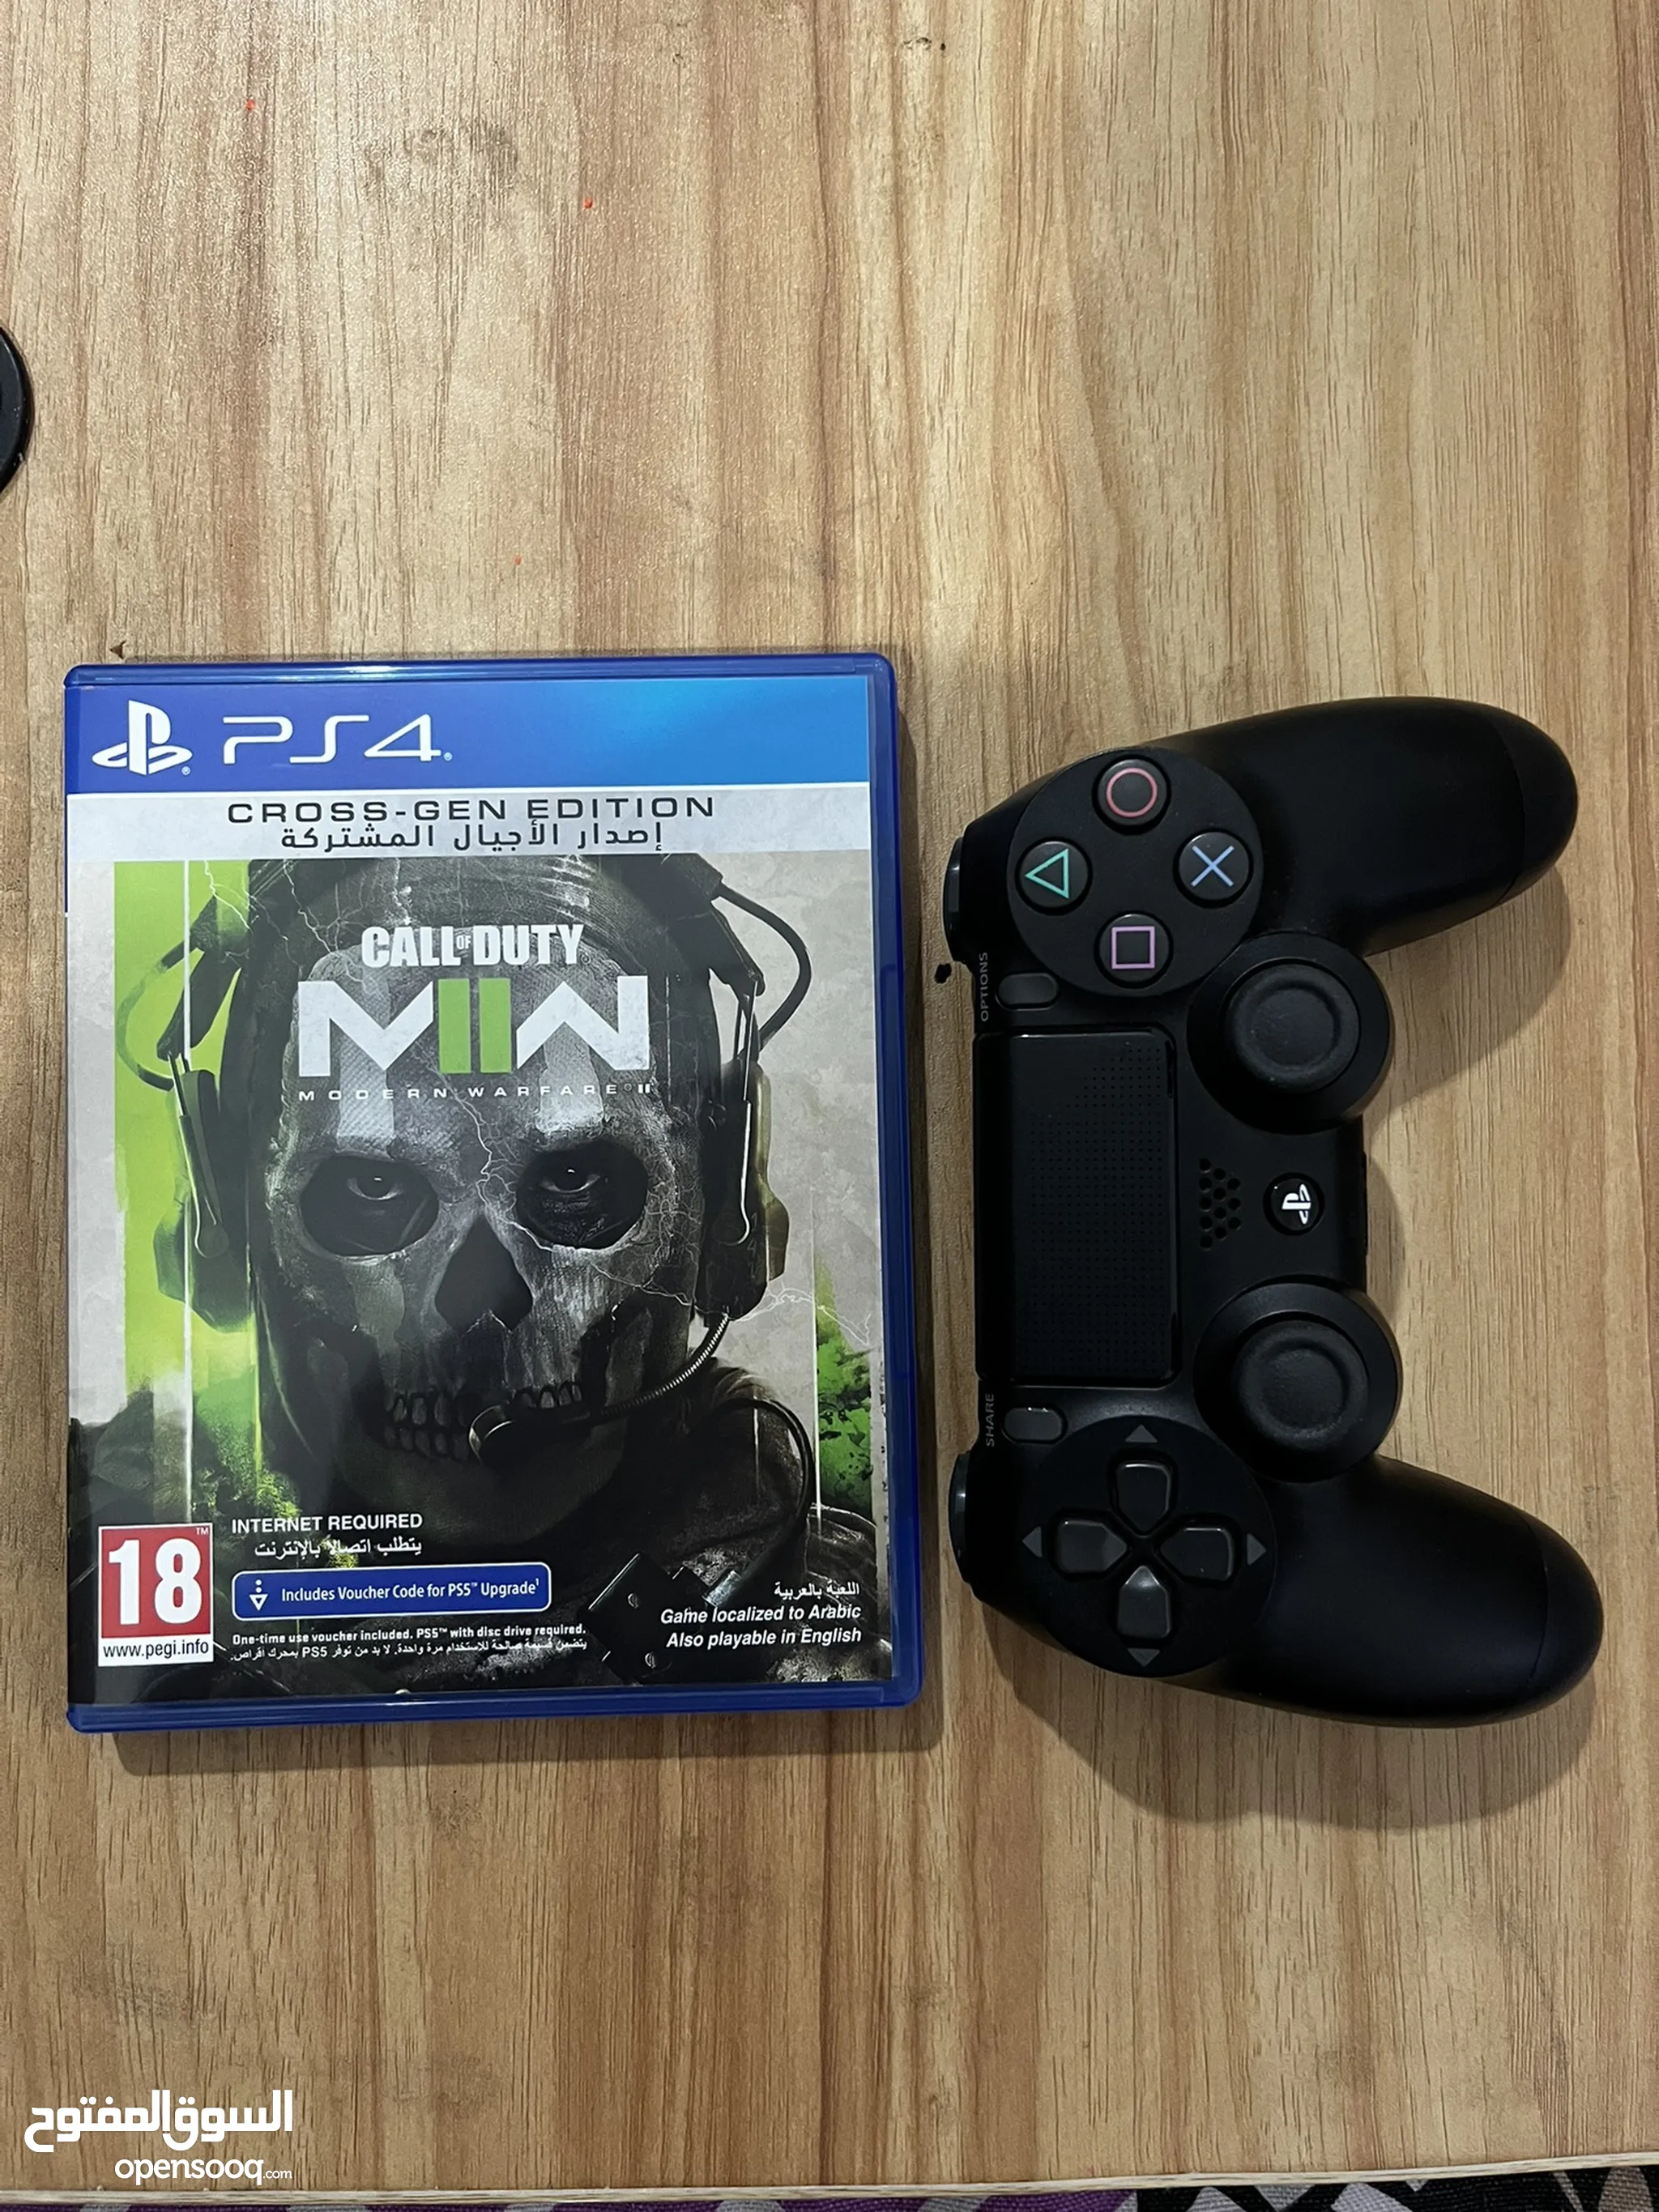 Playstation 4 For Sale in Hawally : Used : Best Prices | OpenSooq